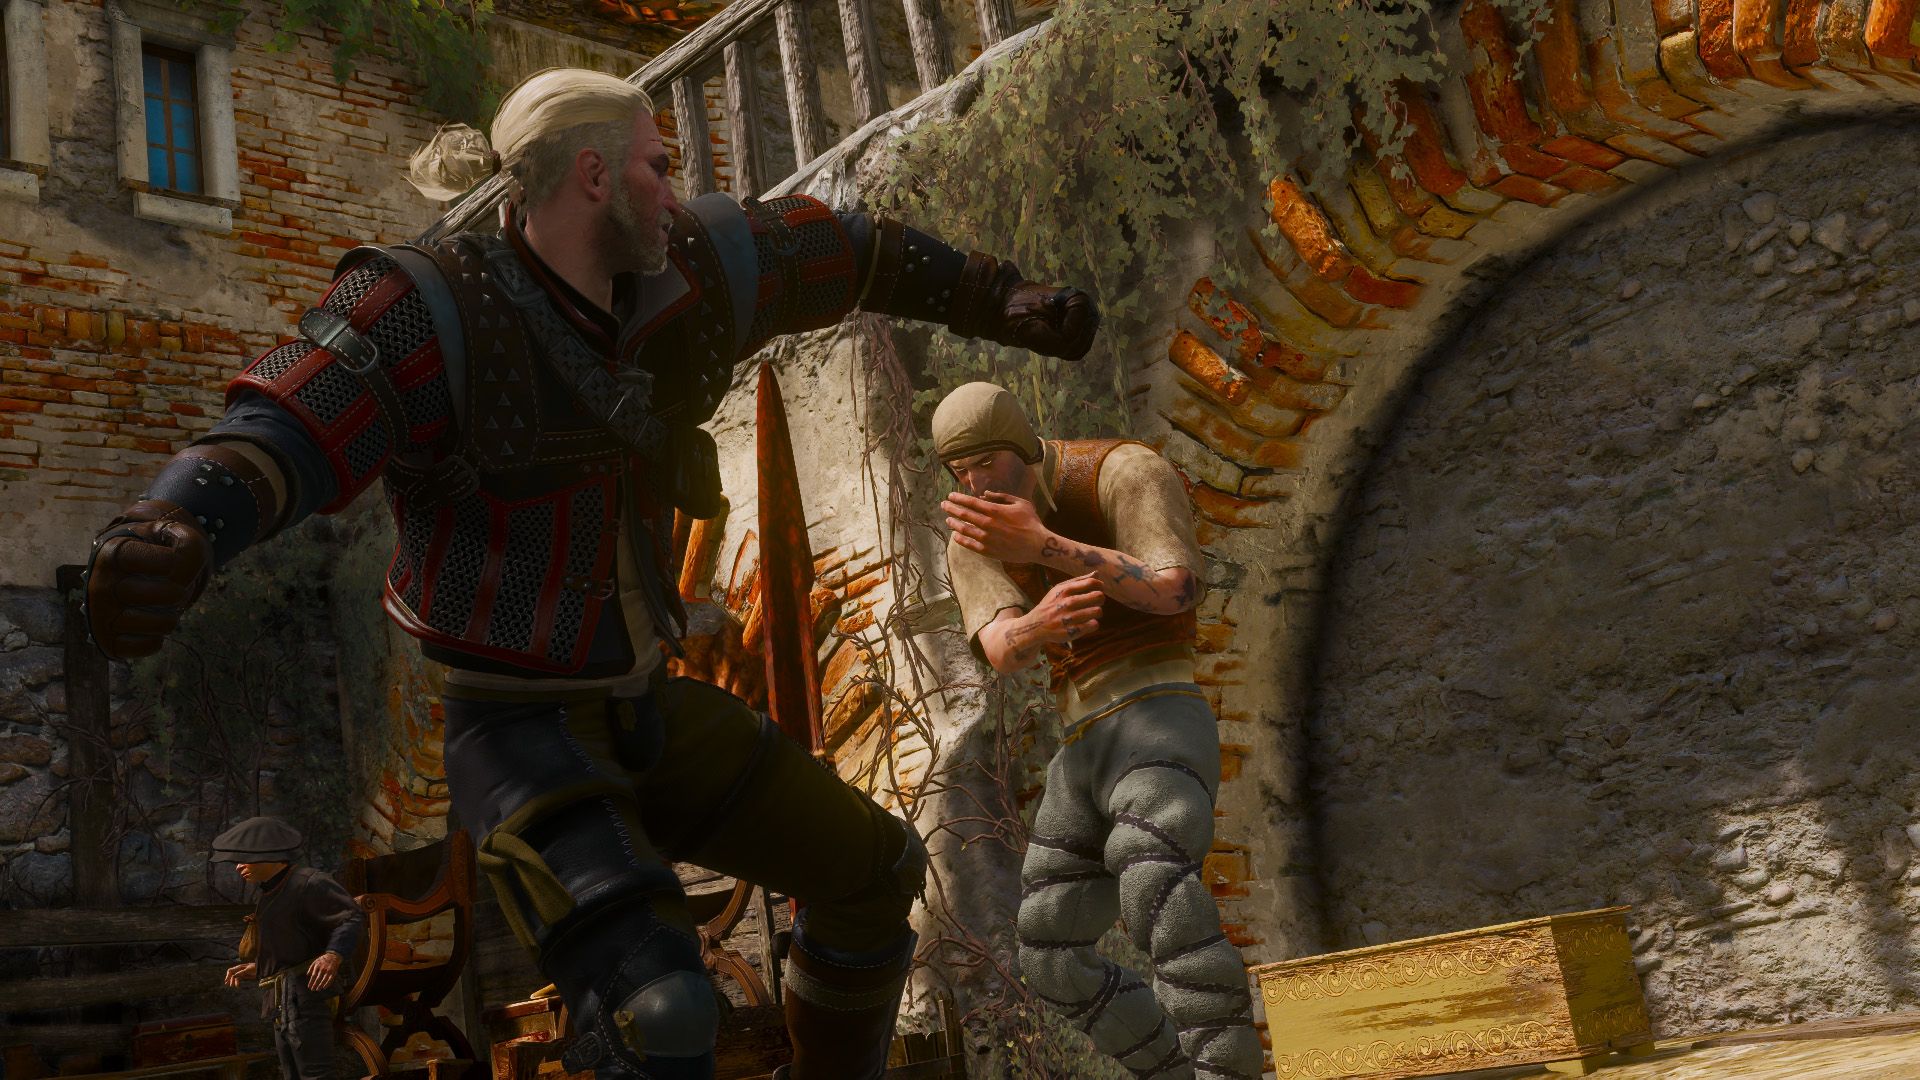 Geralt brings his hand back as he prepares to punch the man in the face.